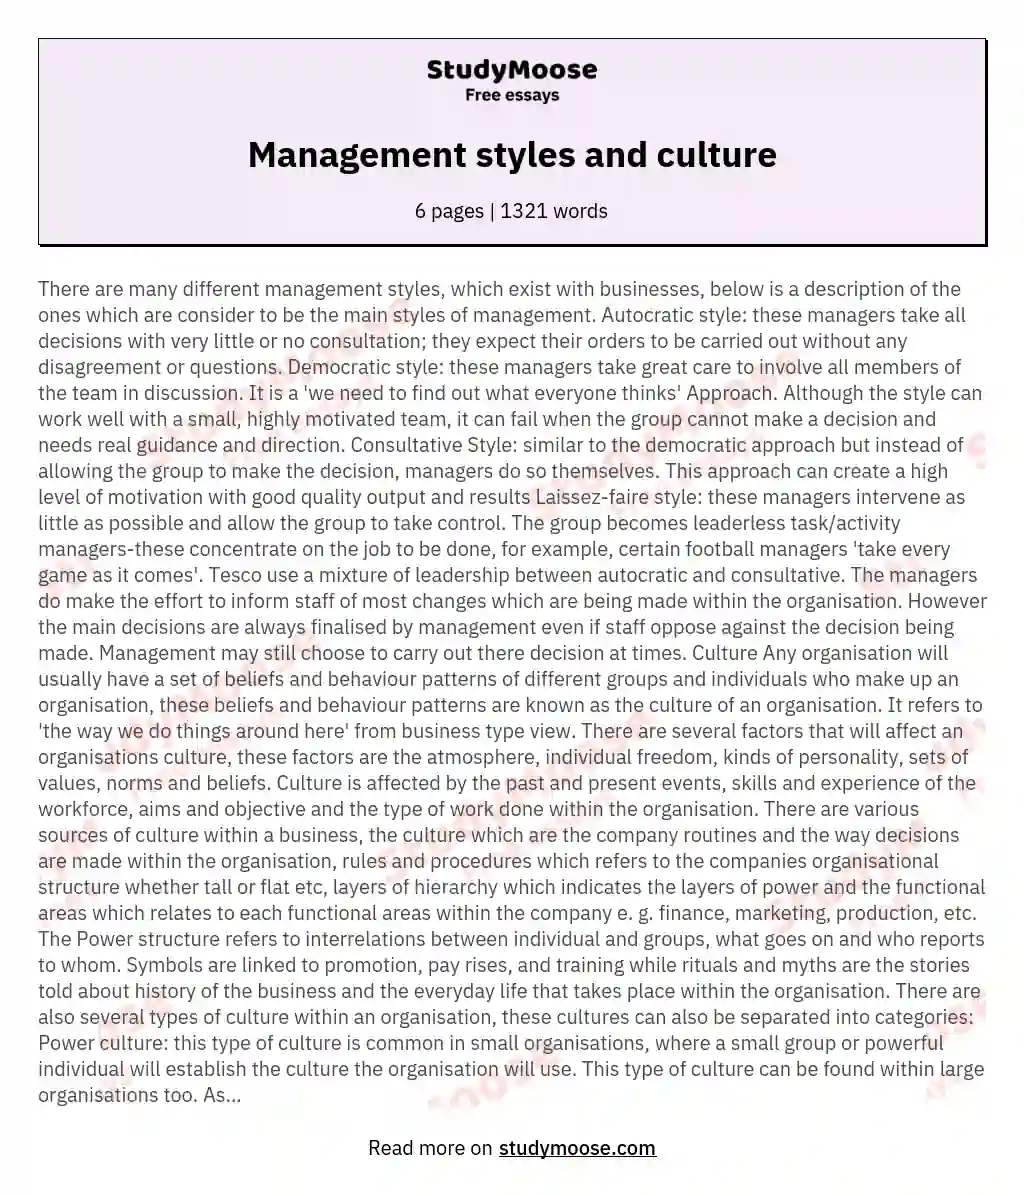 Management styles and culture essay